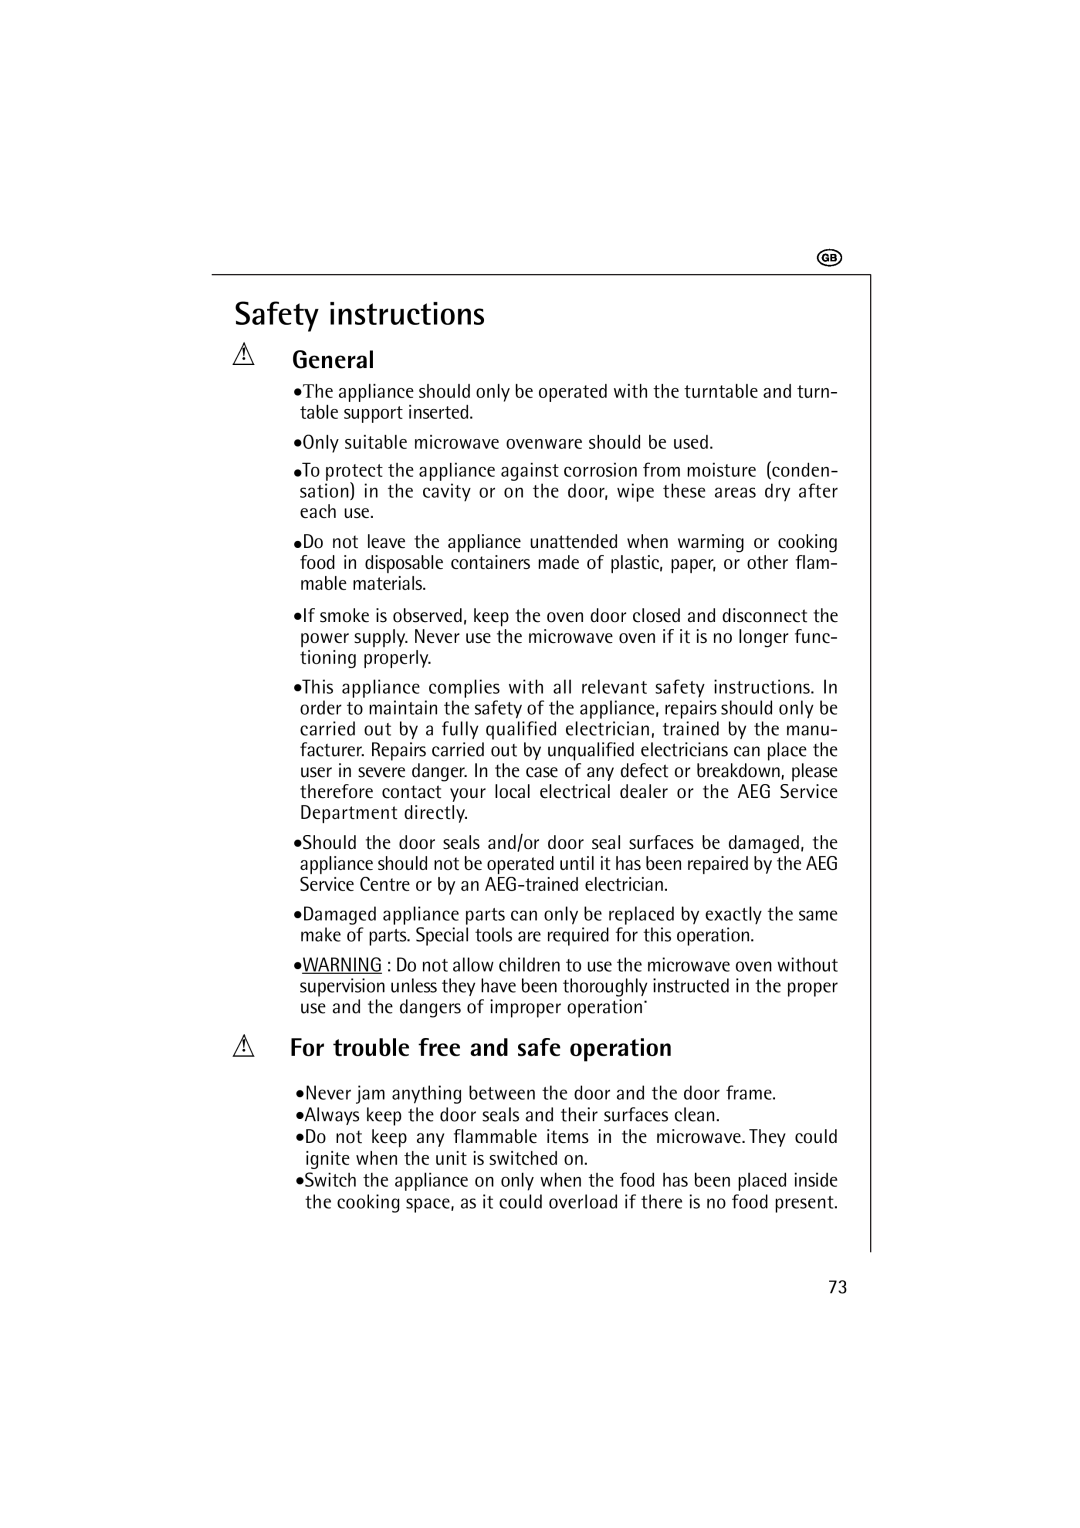 AEG 1231 E manual Safety instructions, General, For trouble free and safe operation 